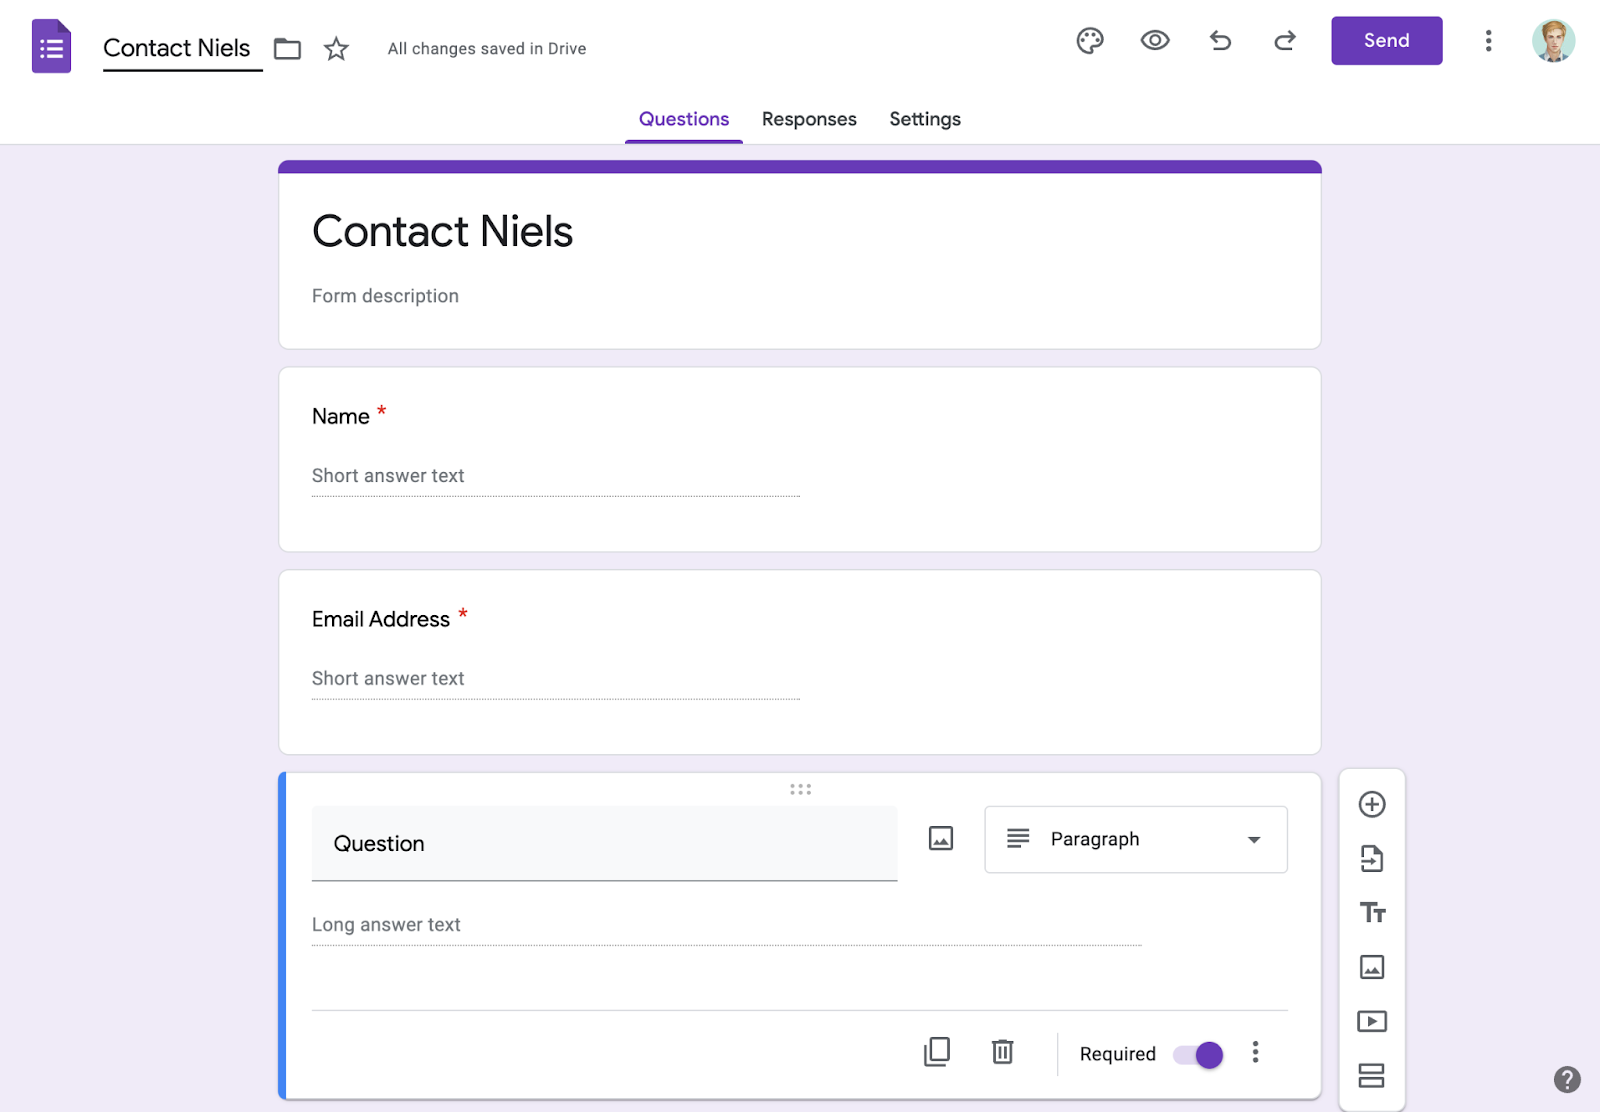 Google Form named "Contact Niels" with 3 form fields: Name, Email Address, and Question